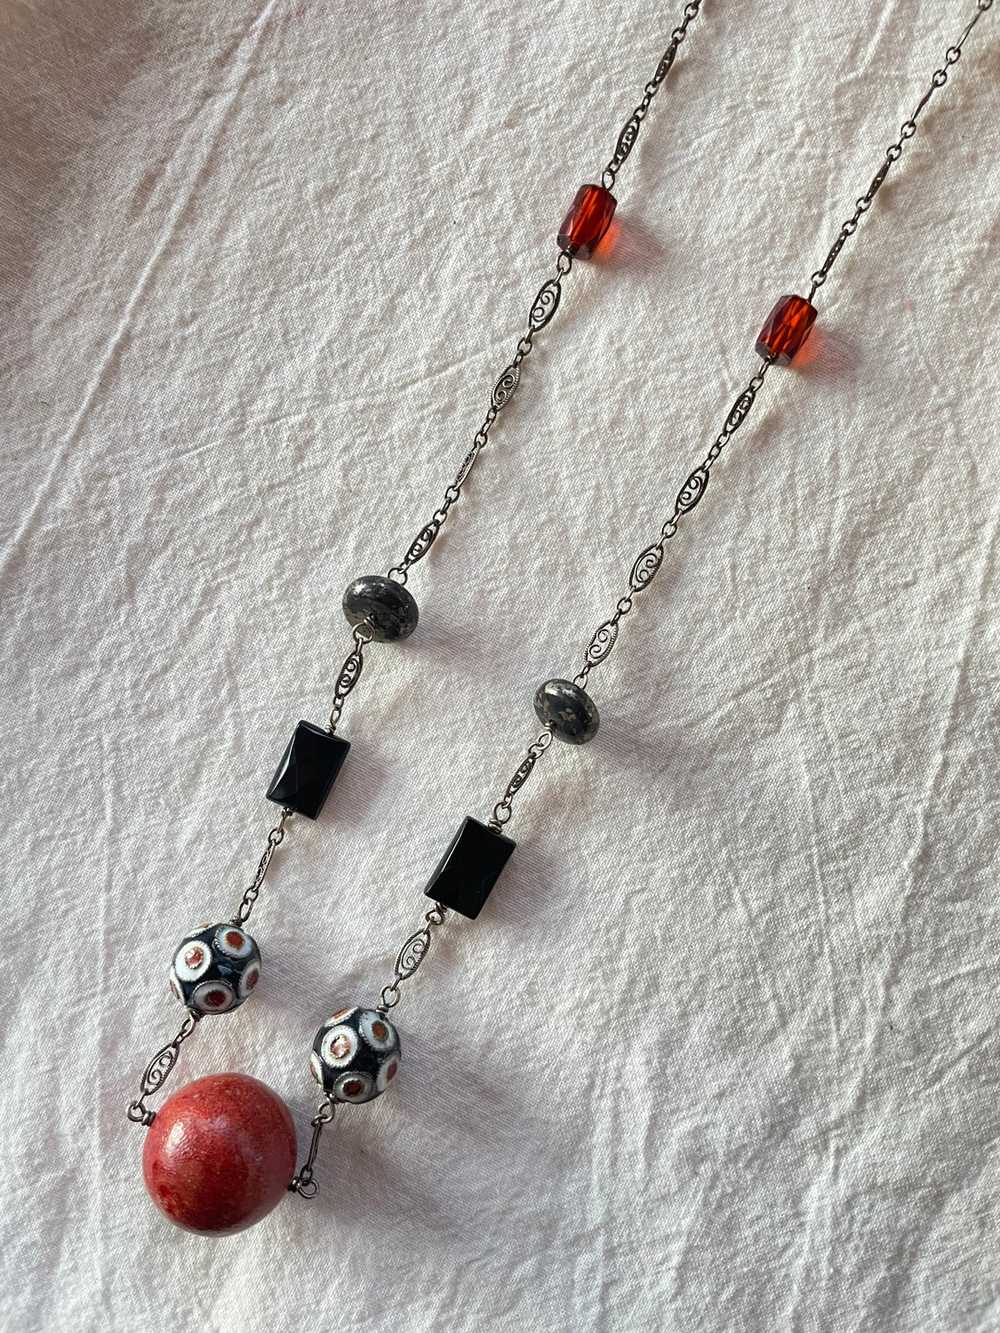 Liza Shtromberg Silver, Onyx and Cinnabar Necklace - image 3